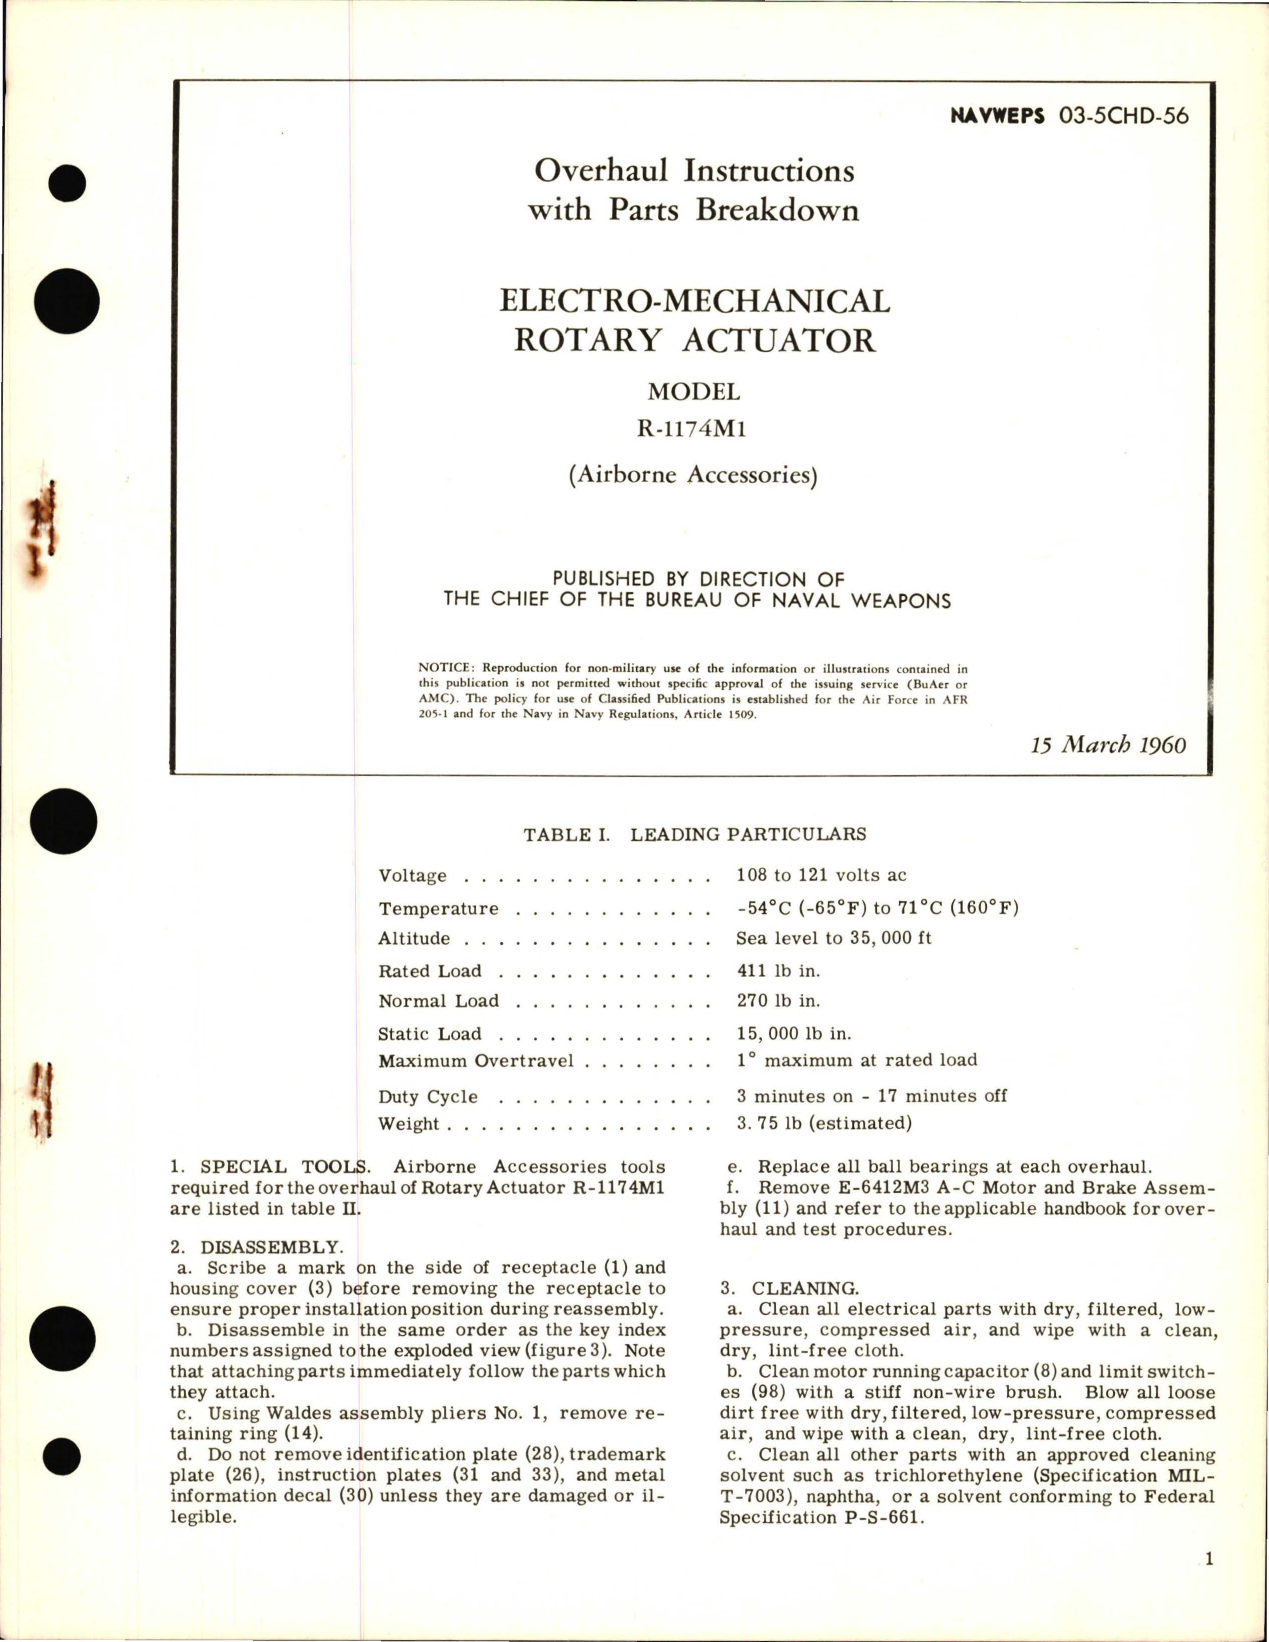 Sample page 1 from AirCorps Library document: Overhaul Instructions with Parts Breakdown for Electro-Mechanical Rotary Actuator Model R-1174M1